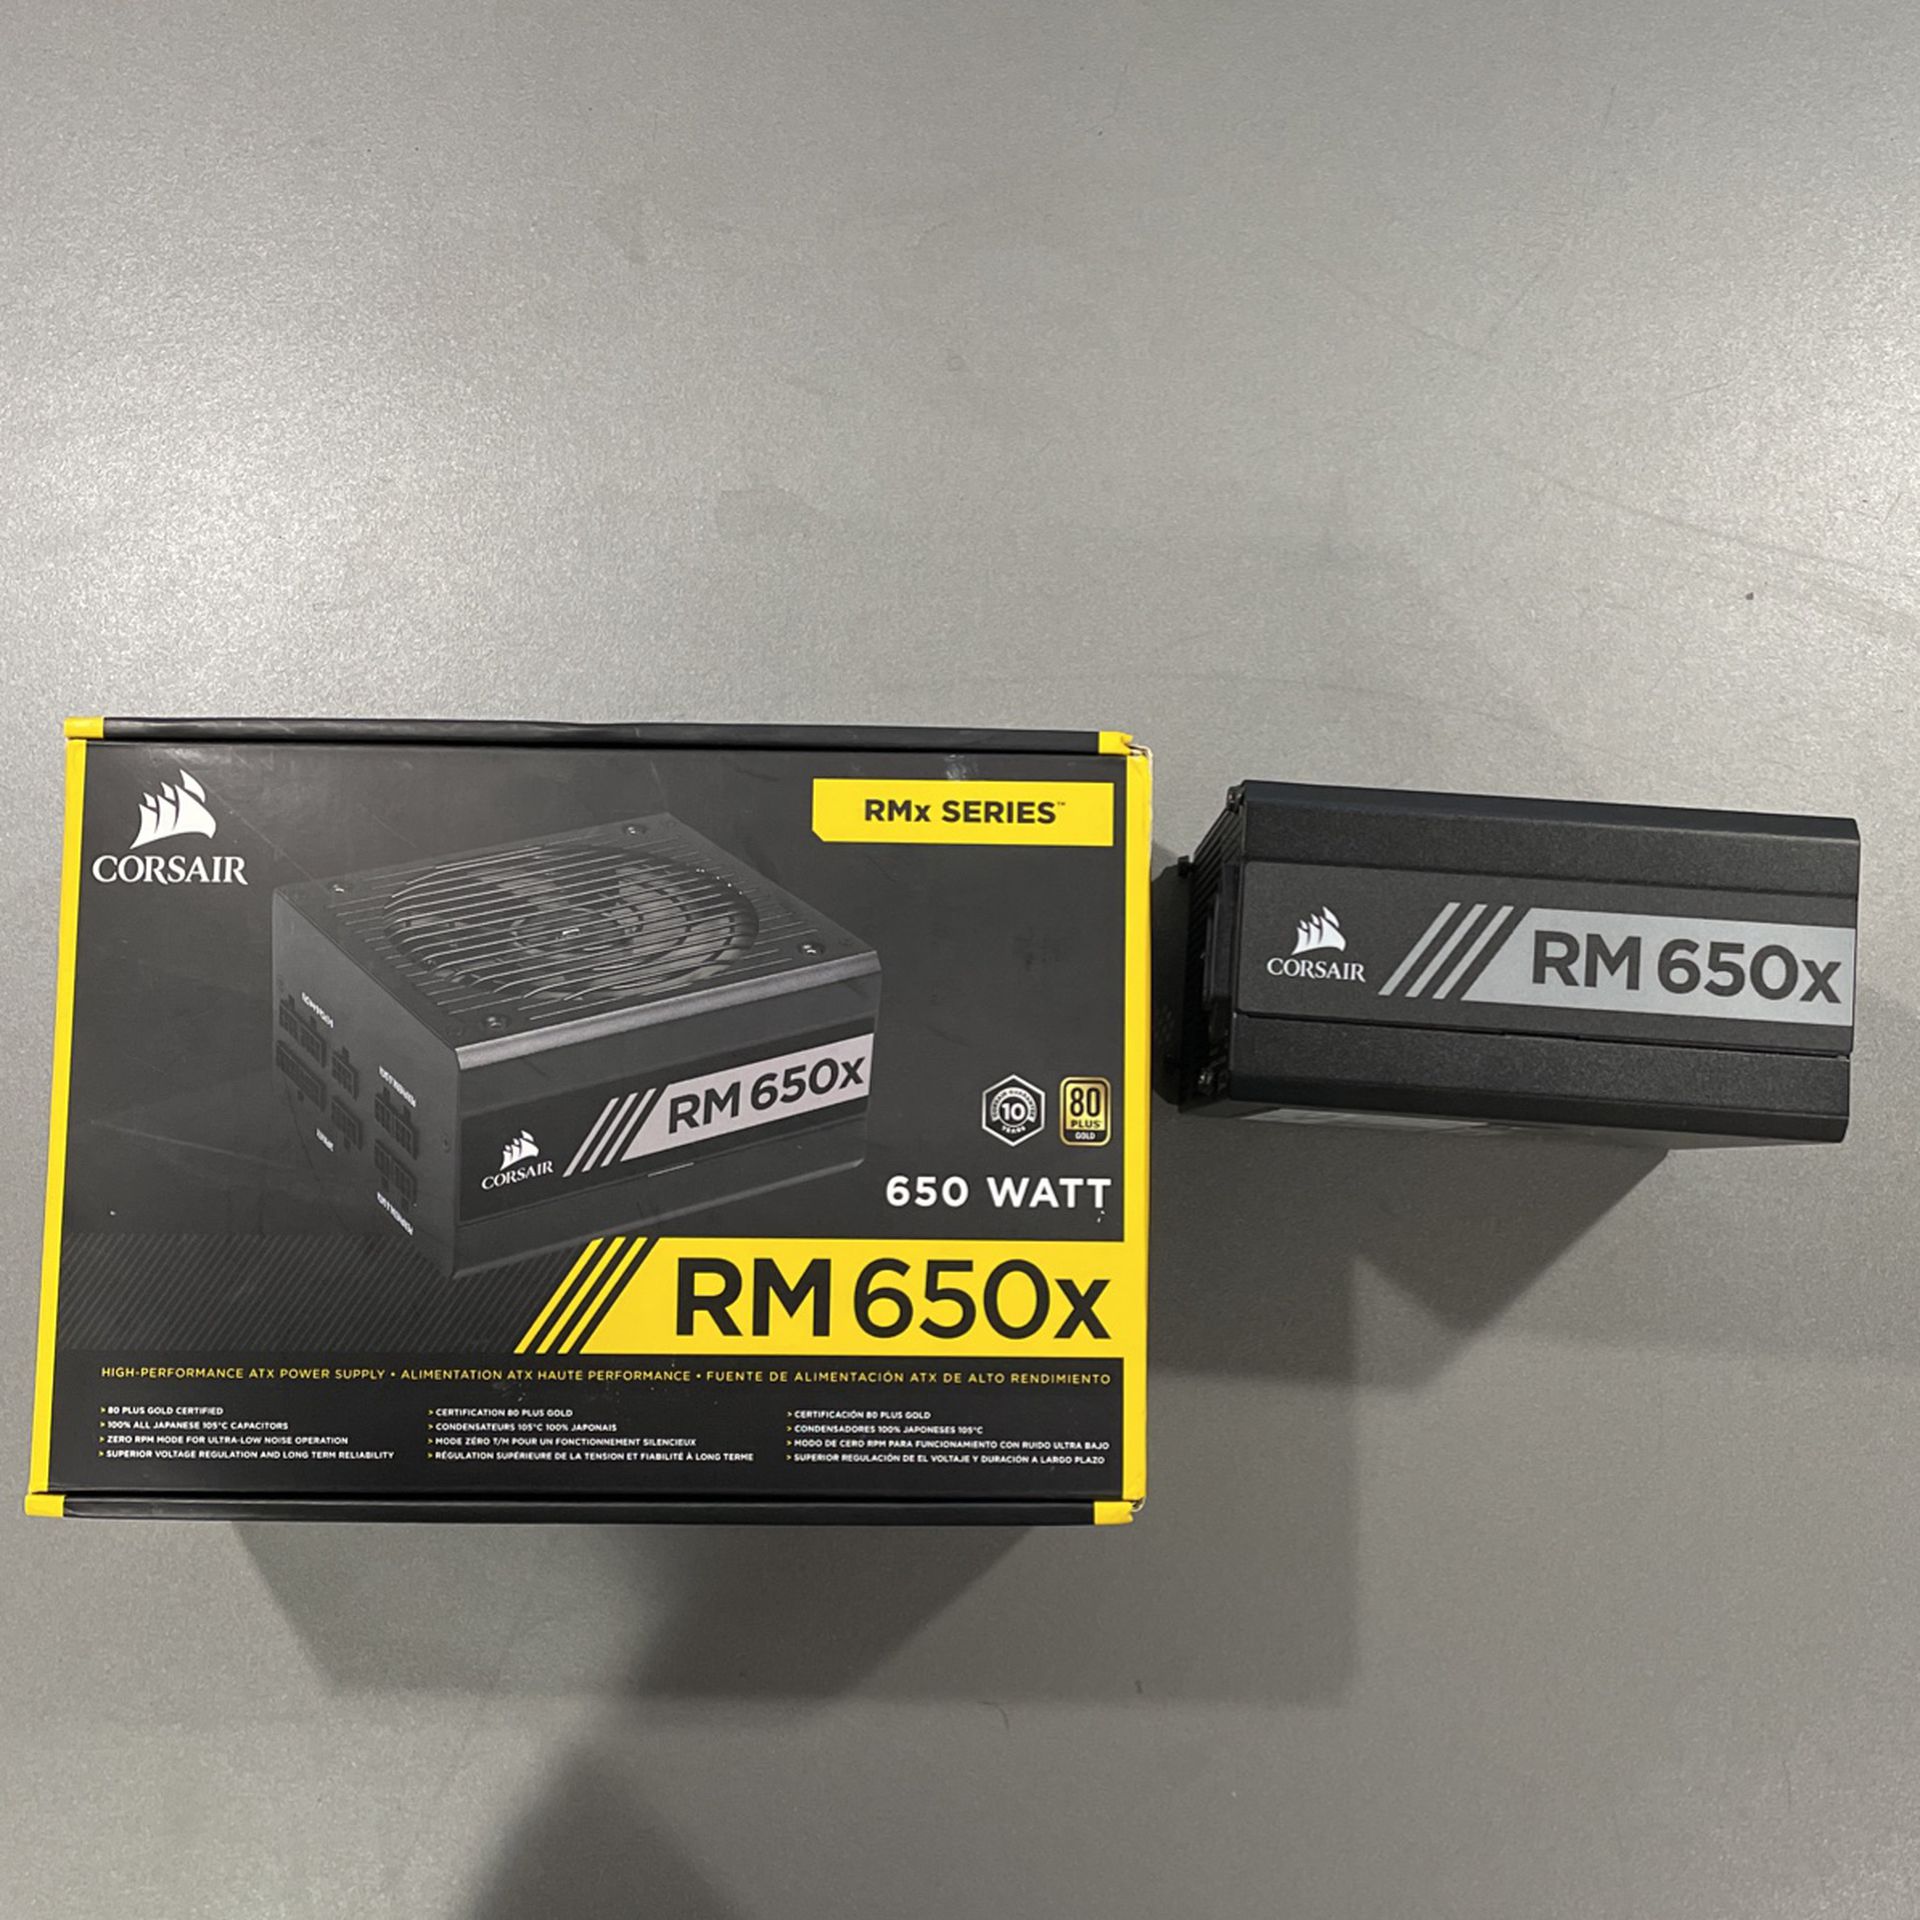 Awakening Stolpe Swipe Corsair RM 650x Power Supply for Sale in Ind Head Park, IL - OfferUp